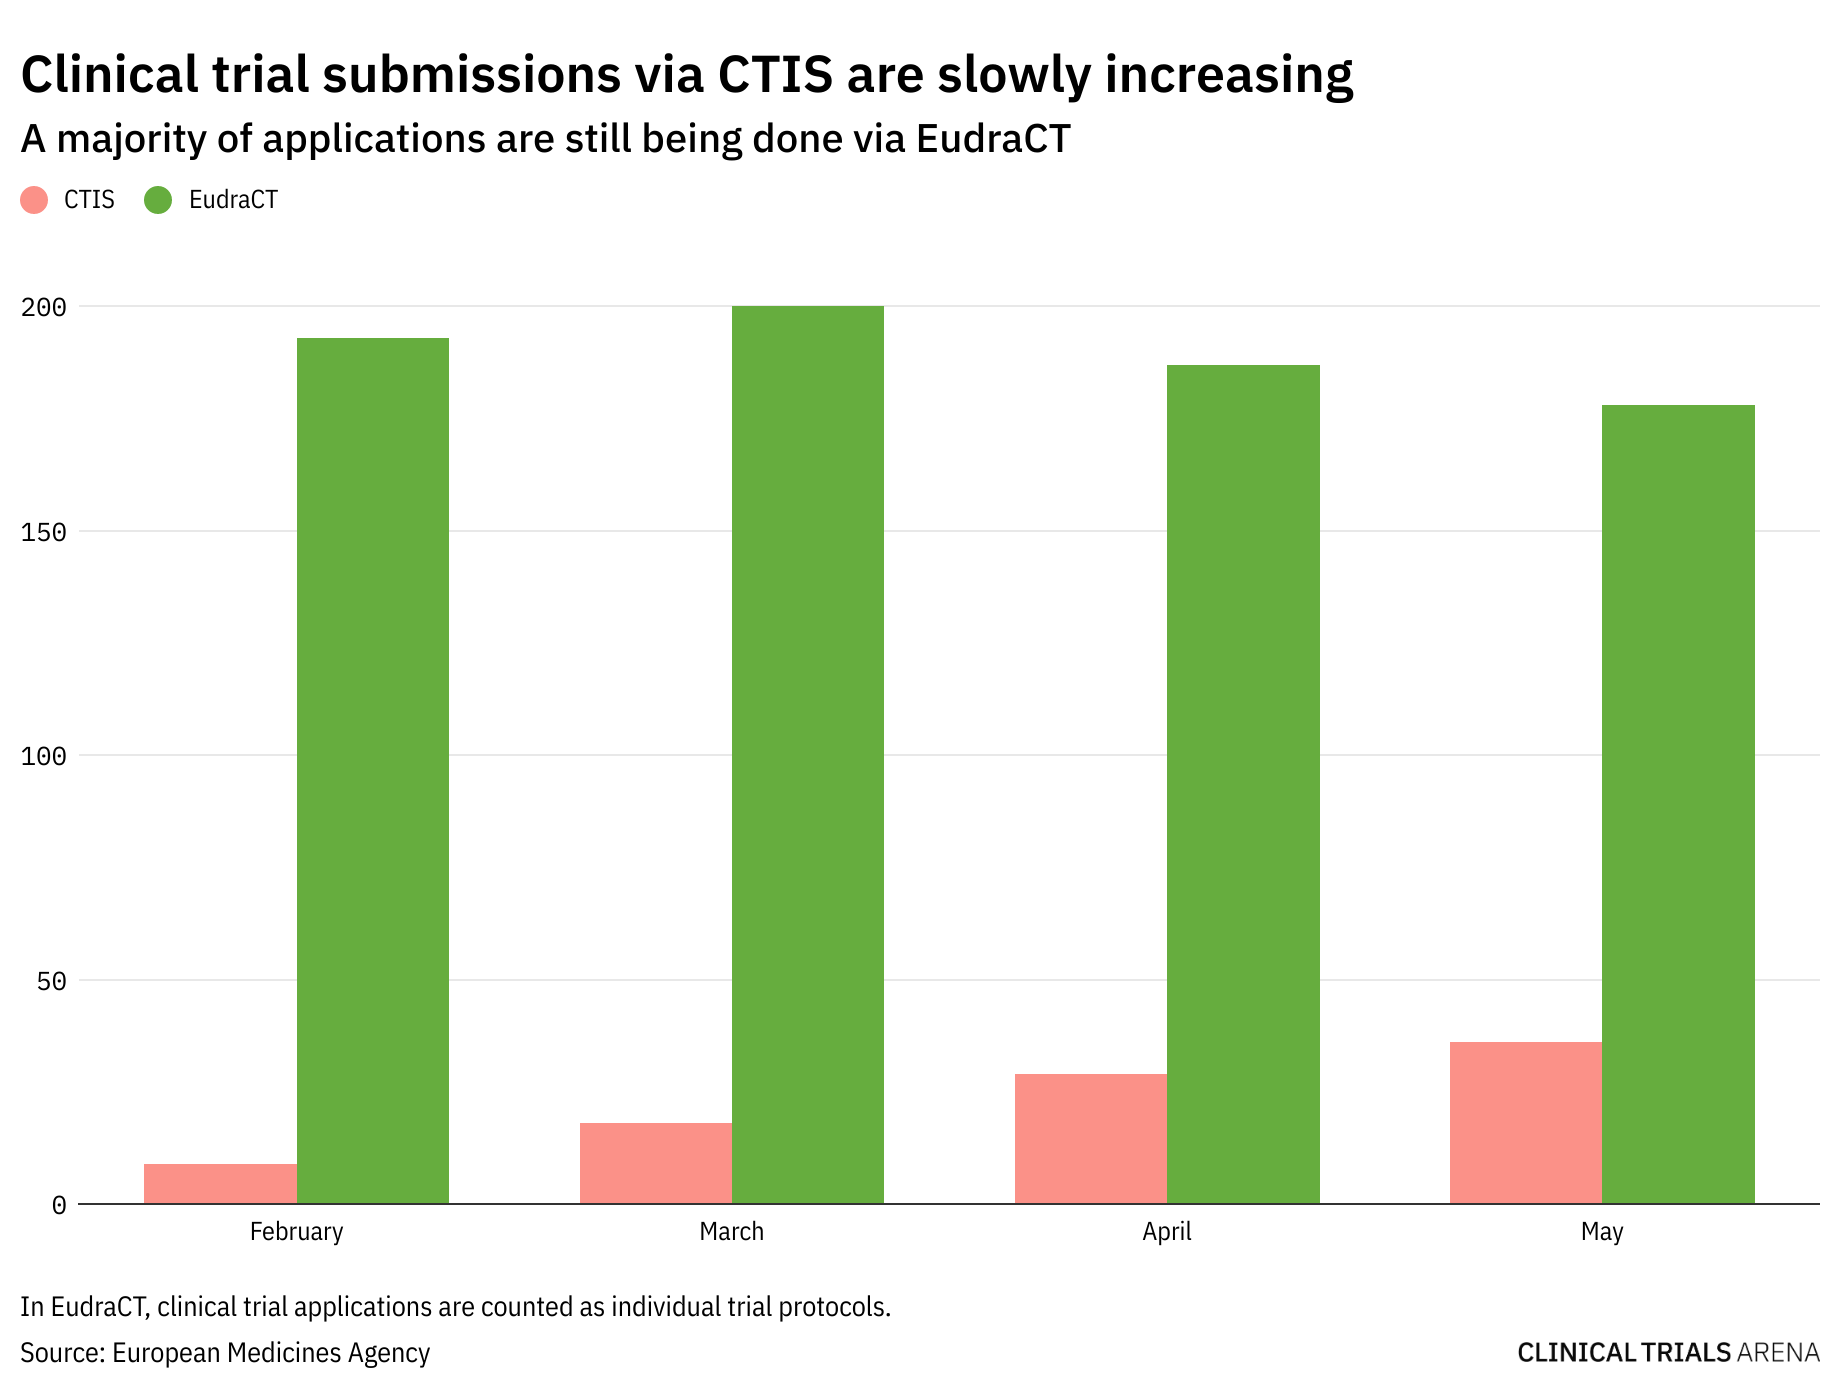 No time to delay: sponsors need to act fast ahead of CTIS deadline